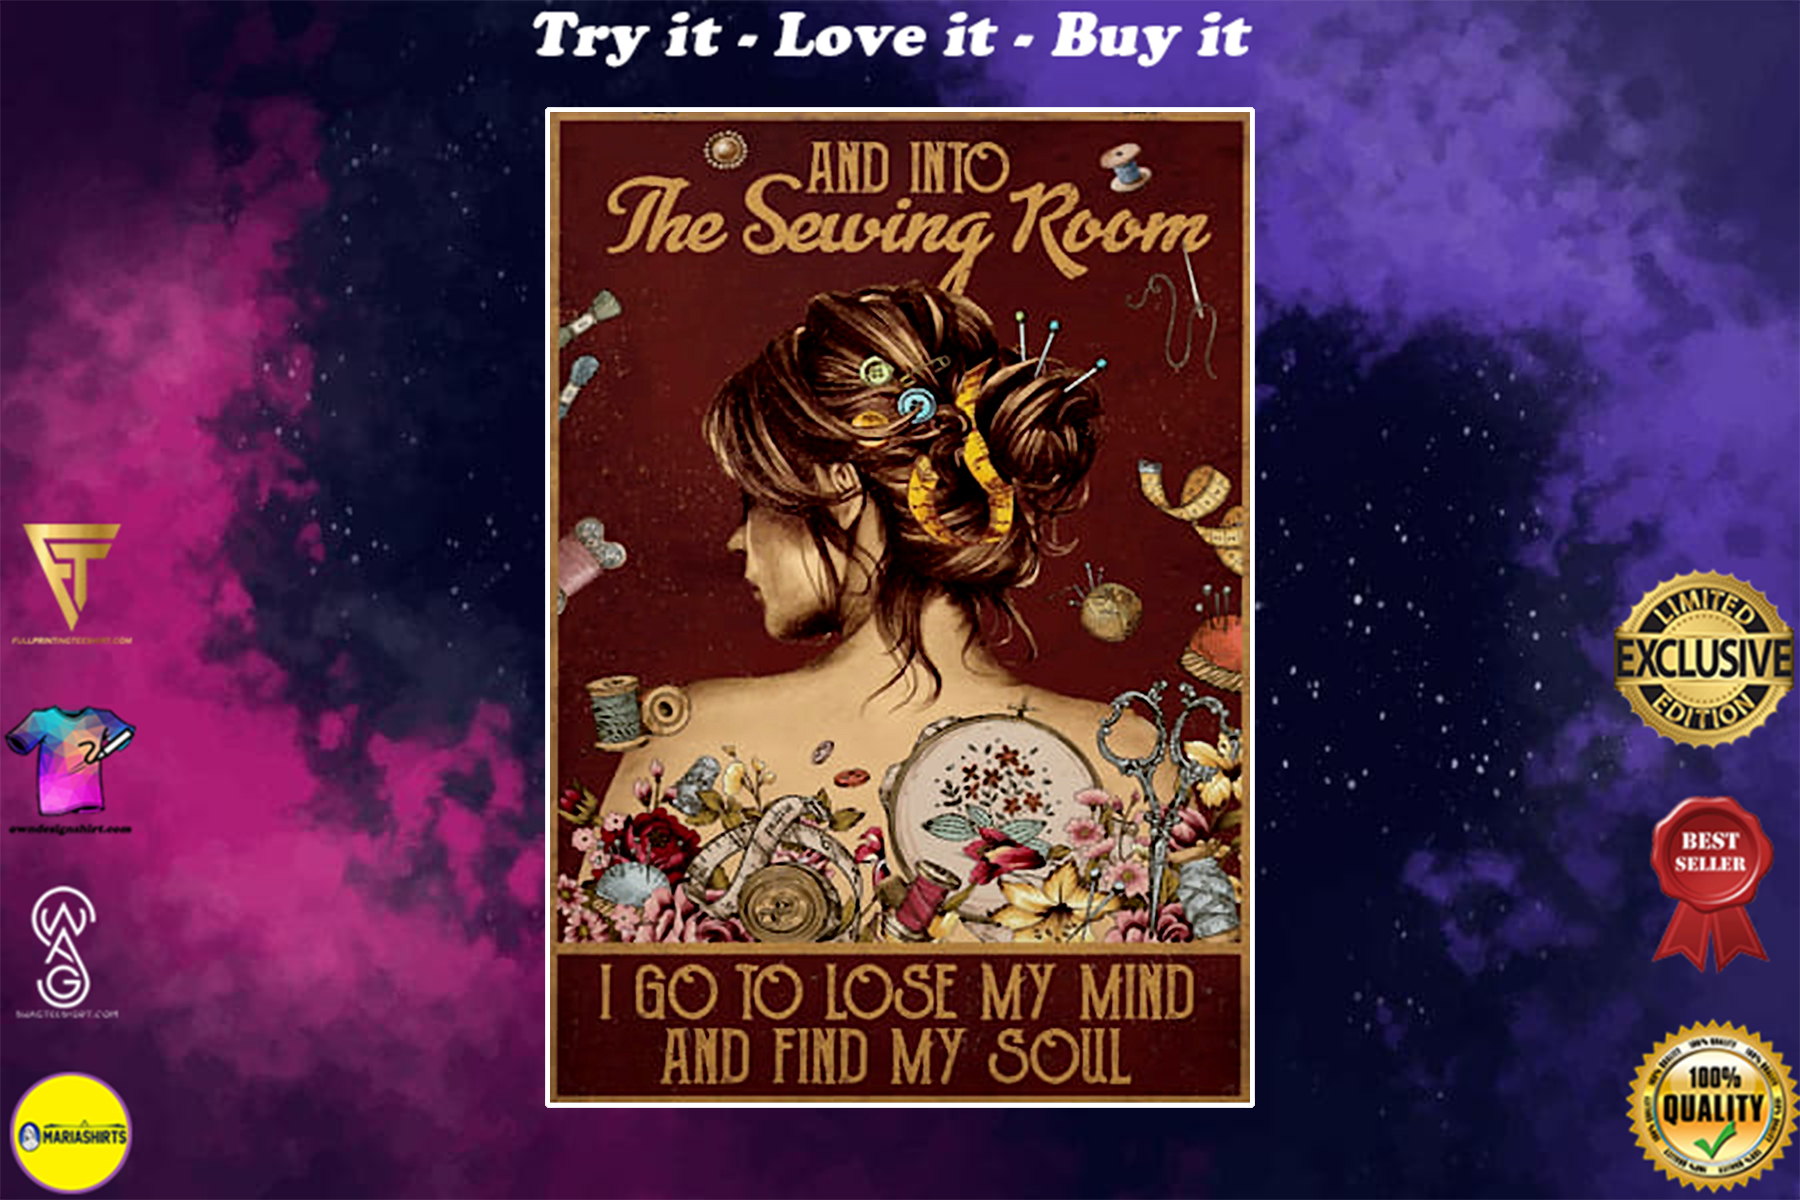 and into the sewing room i go to lose my mind and find my soul poster